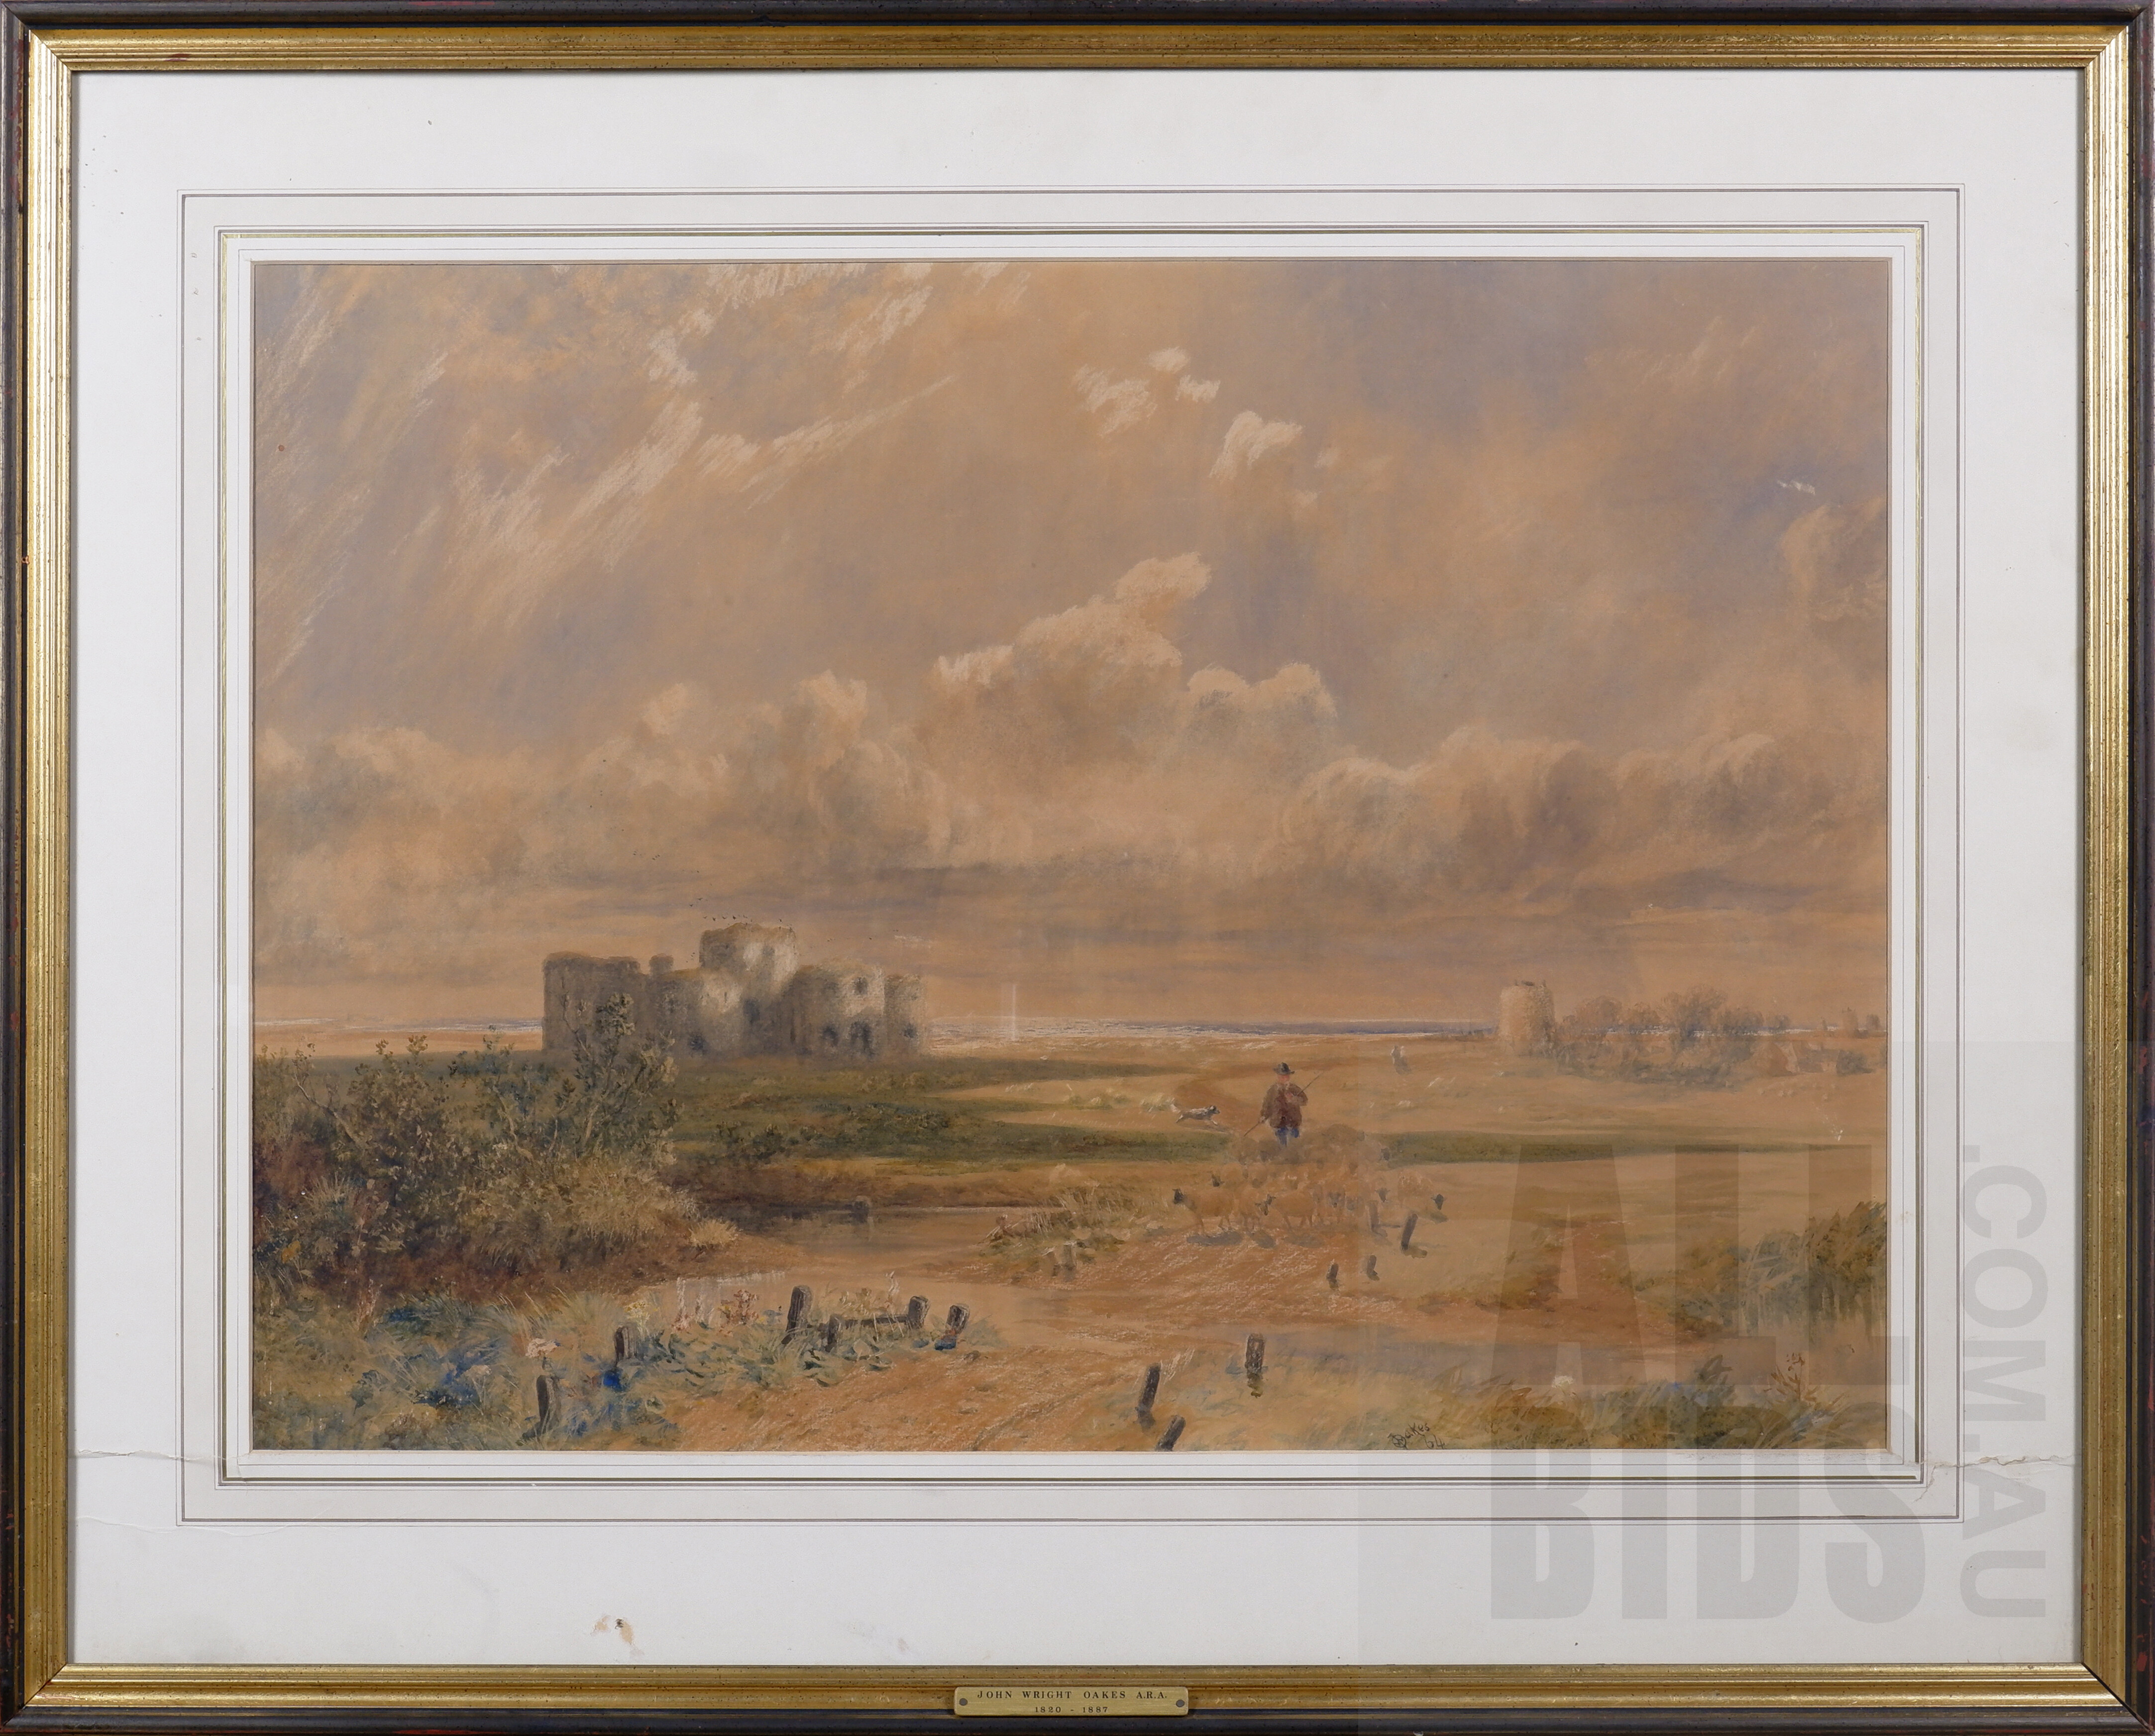 'John Wright Oakes (1820-1887), A View of Coombe at Rye in Sussex with a Shepherd and his Flock in the Foreground 1864, Pencil and Coloured Washes, 55 x 76 cm'